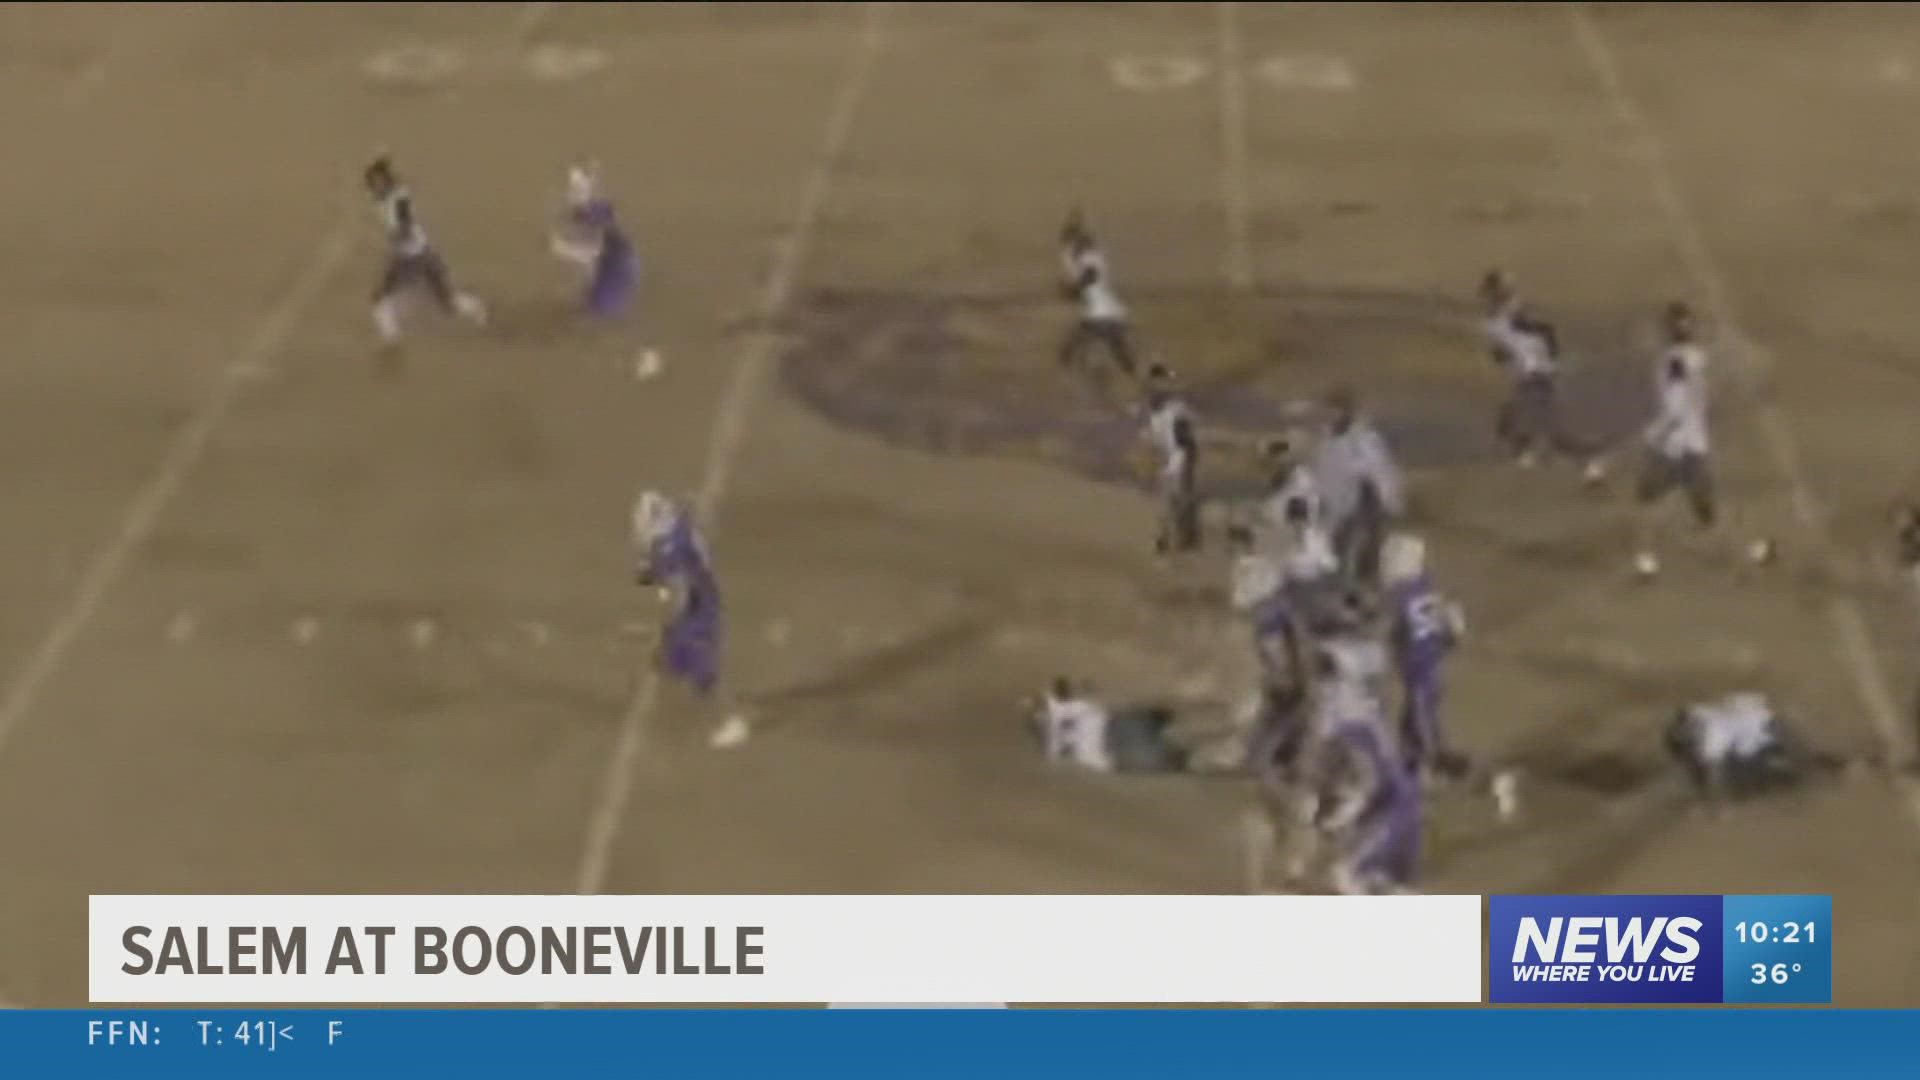 The Booneville Bearcats open the playoffs with a win.